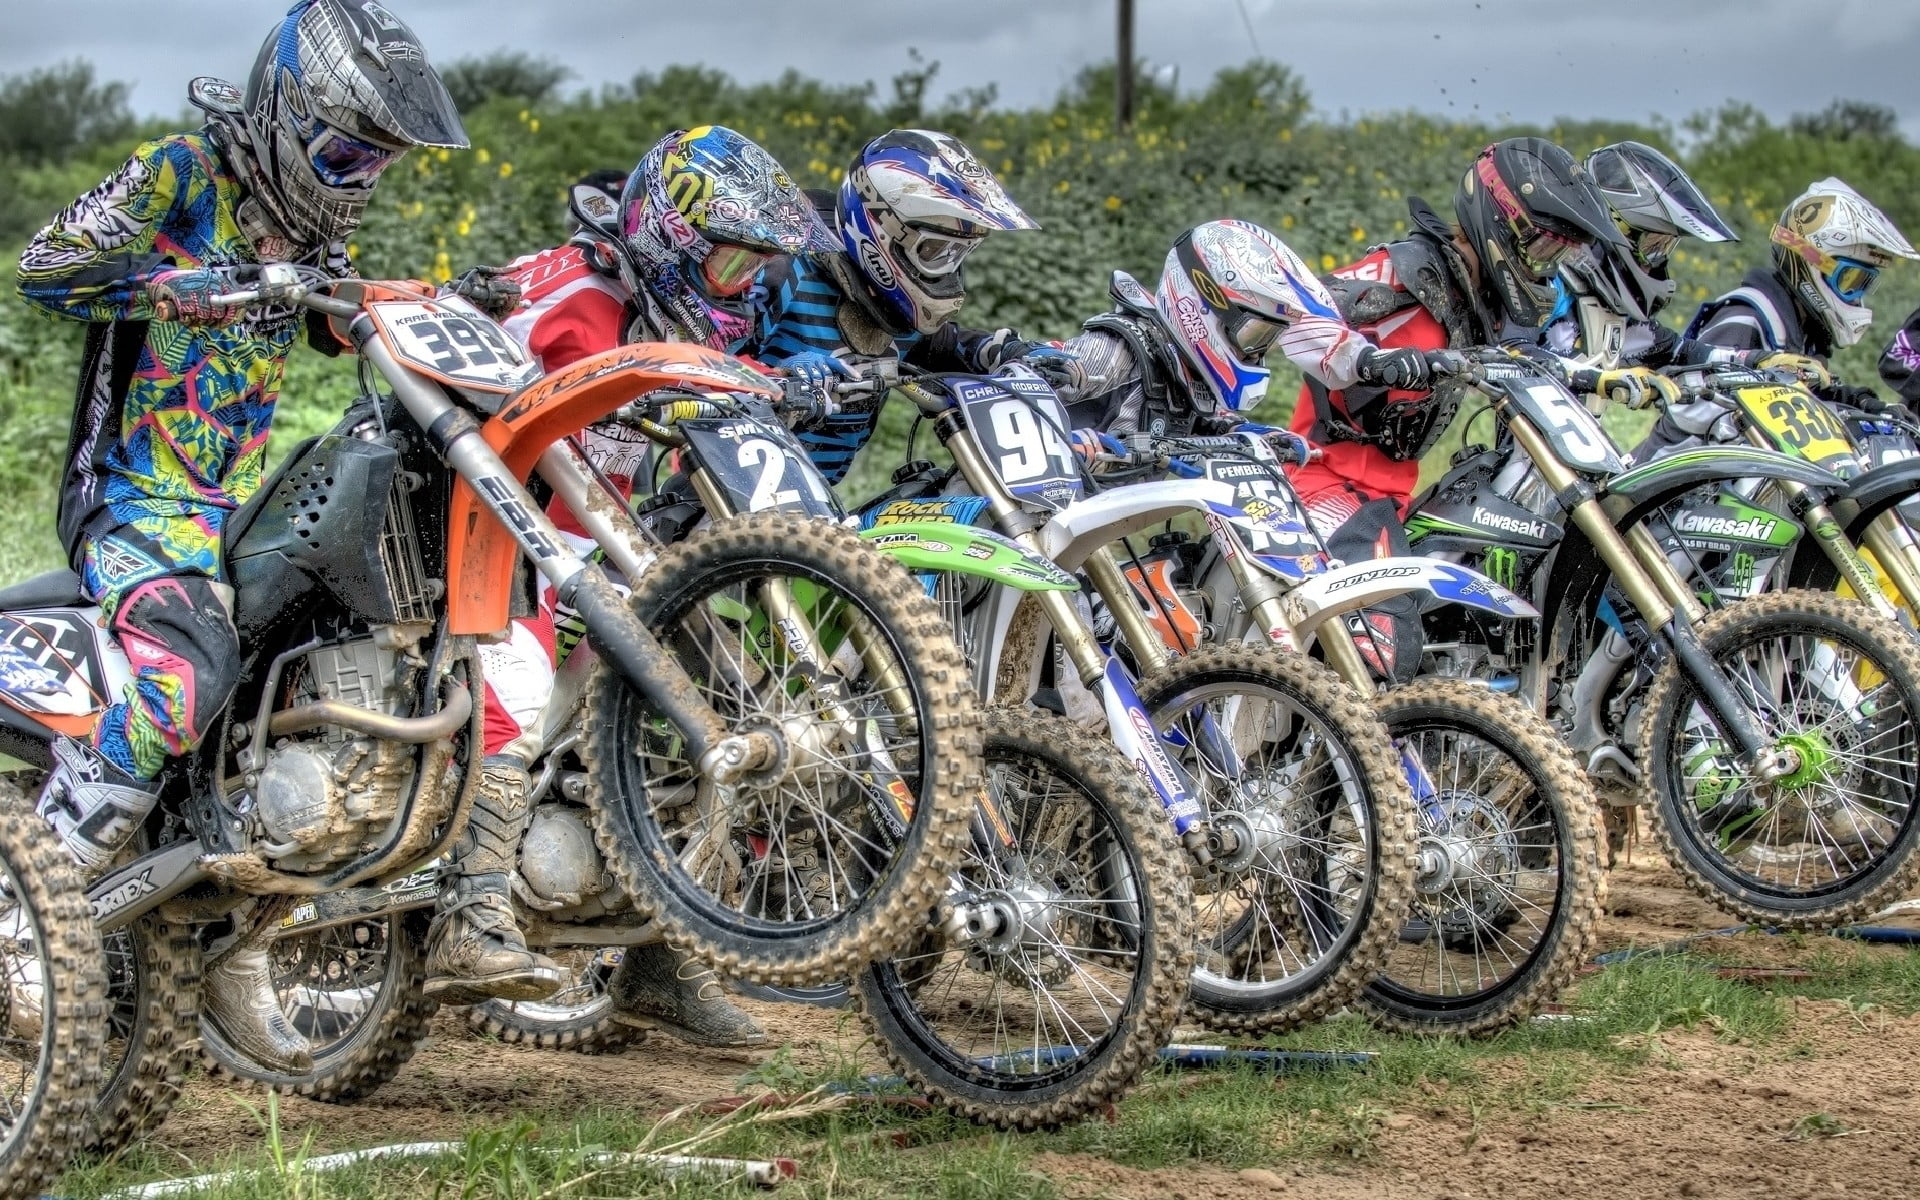 Motocross: The Series Is The Major Outdoor Motocross Event In The United States And Is Managed By MX Sports Pro Racing. 1920x1200 HD Wallpaper.